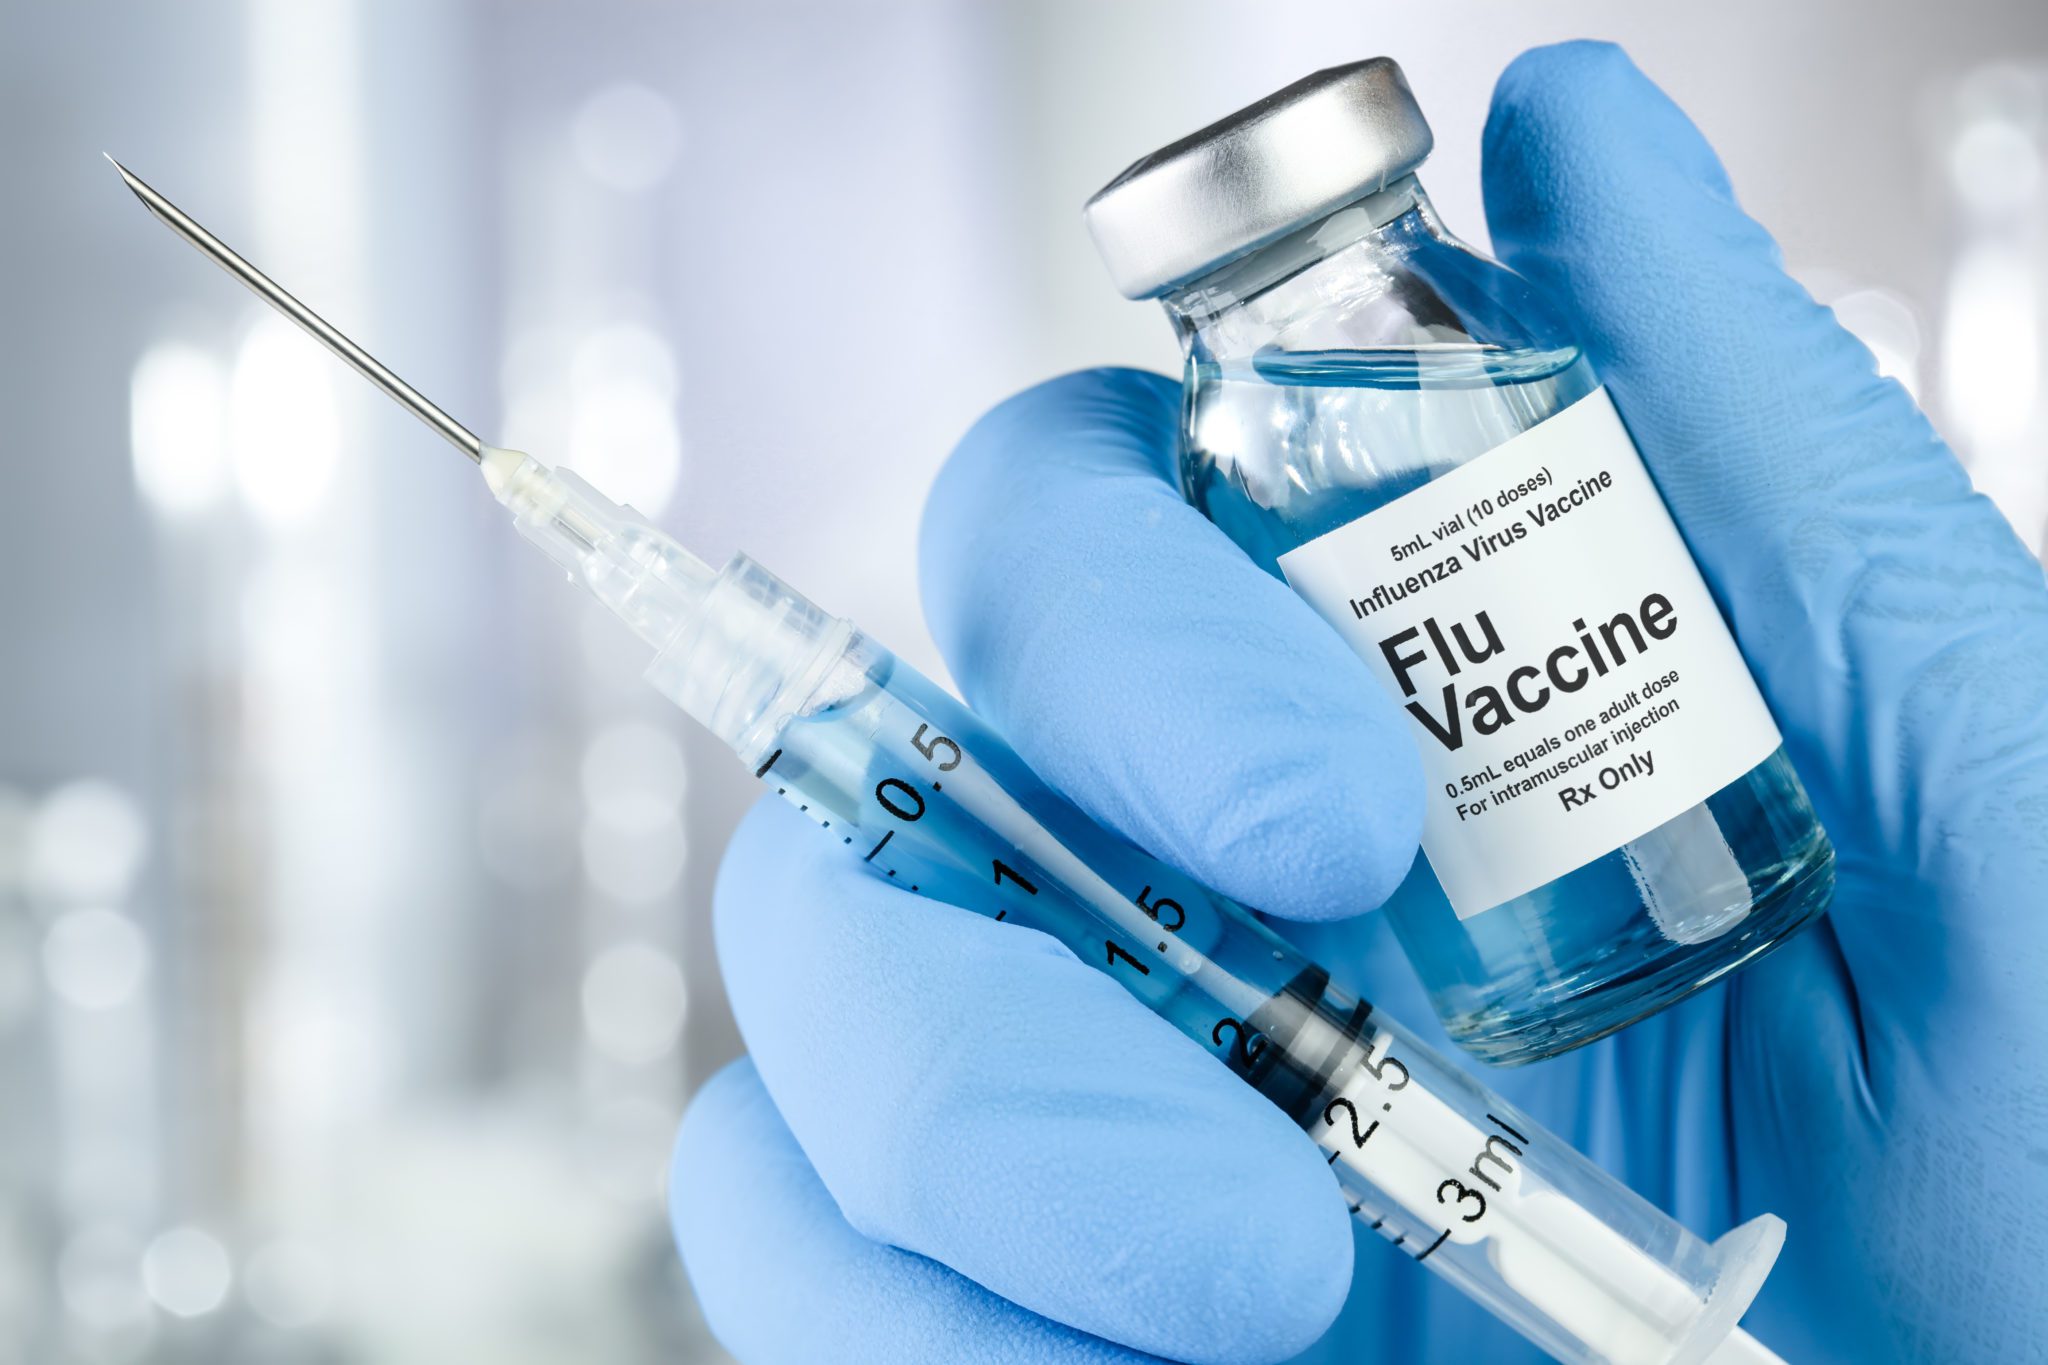 Influenza Vaccine Market Size, Share, Top Companies, Latest Trends, Analysis and Forecast 2022-2027